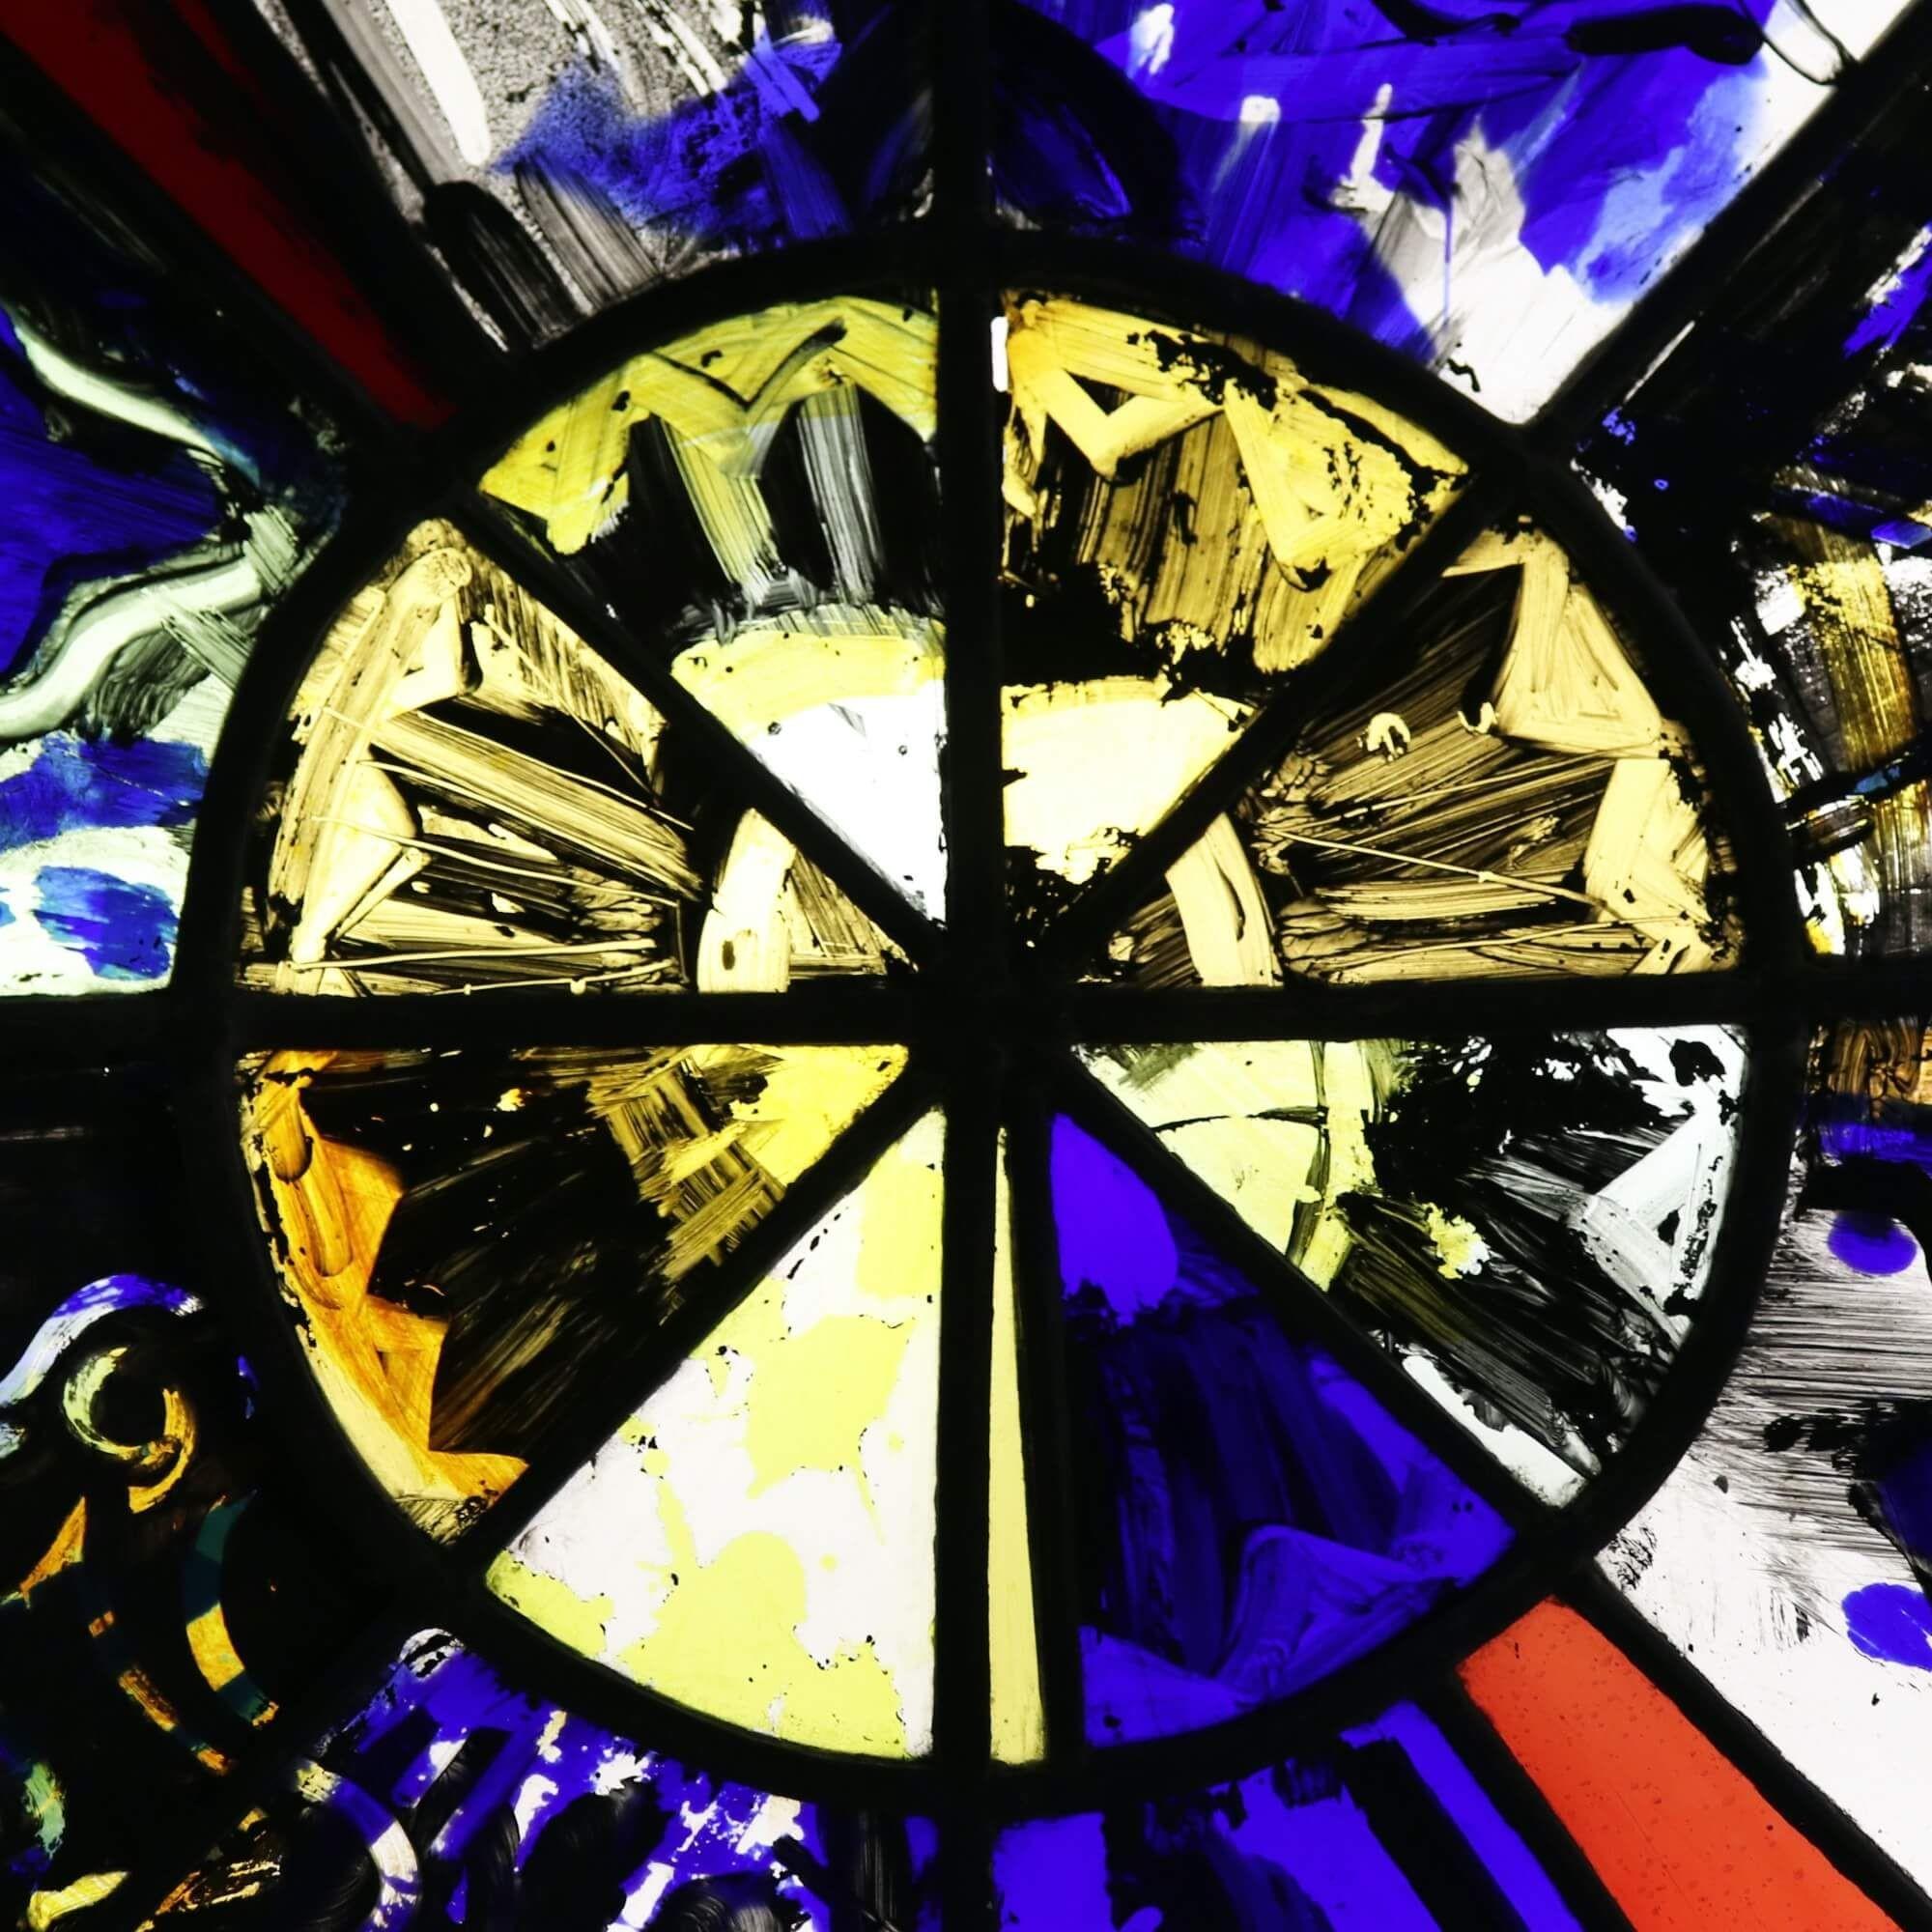 A modern stained glass window from the studio of Patrick Reyntiens (1925-2021). Attributed to the artist, this stained glass panel depicts a sunburst-type design with abstract hand-painted details including what appears to be a fish to the lower